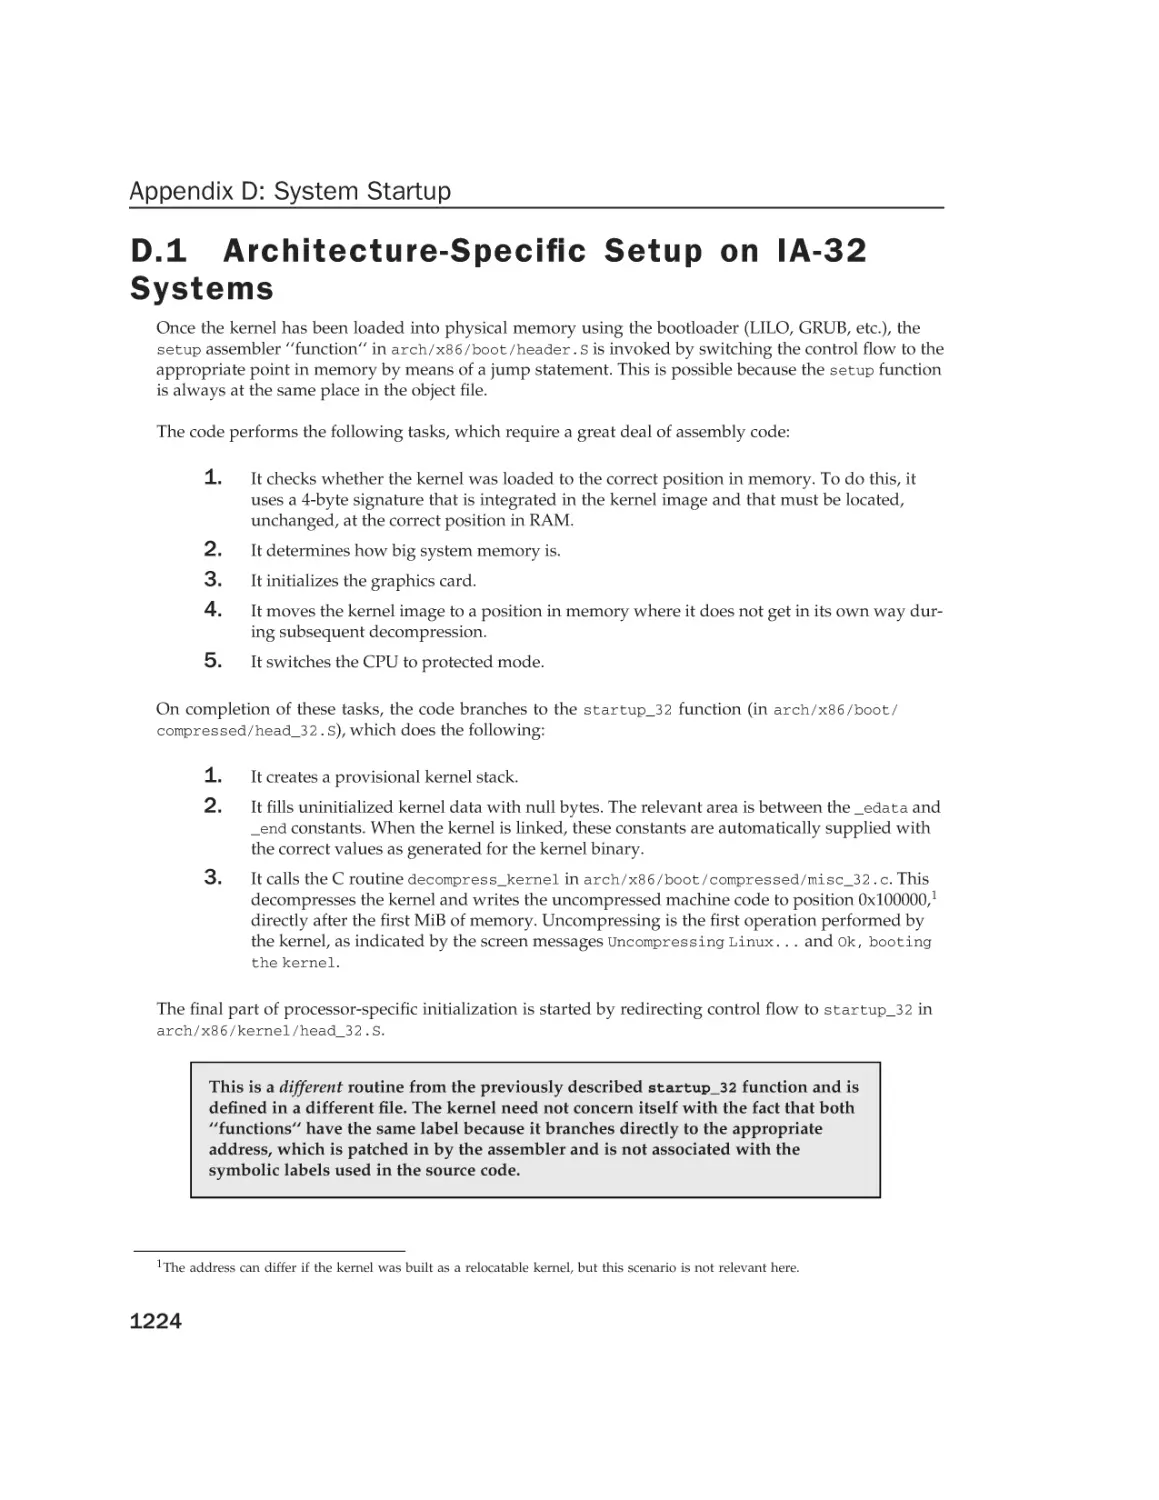 D.1 Architecture-Specific Setup on IA-32 Systems